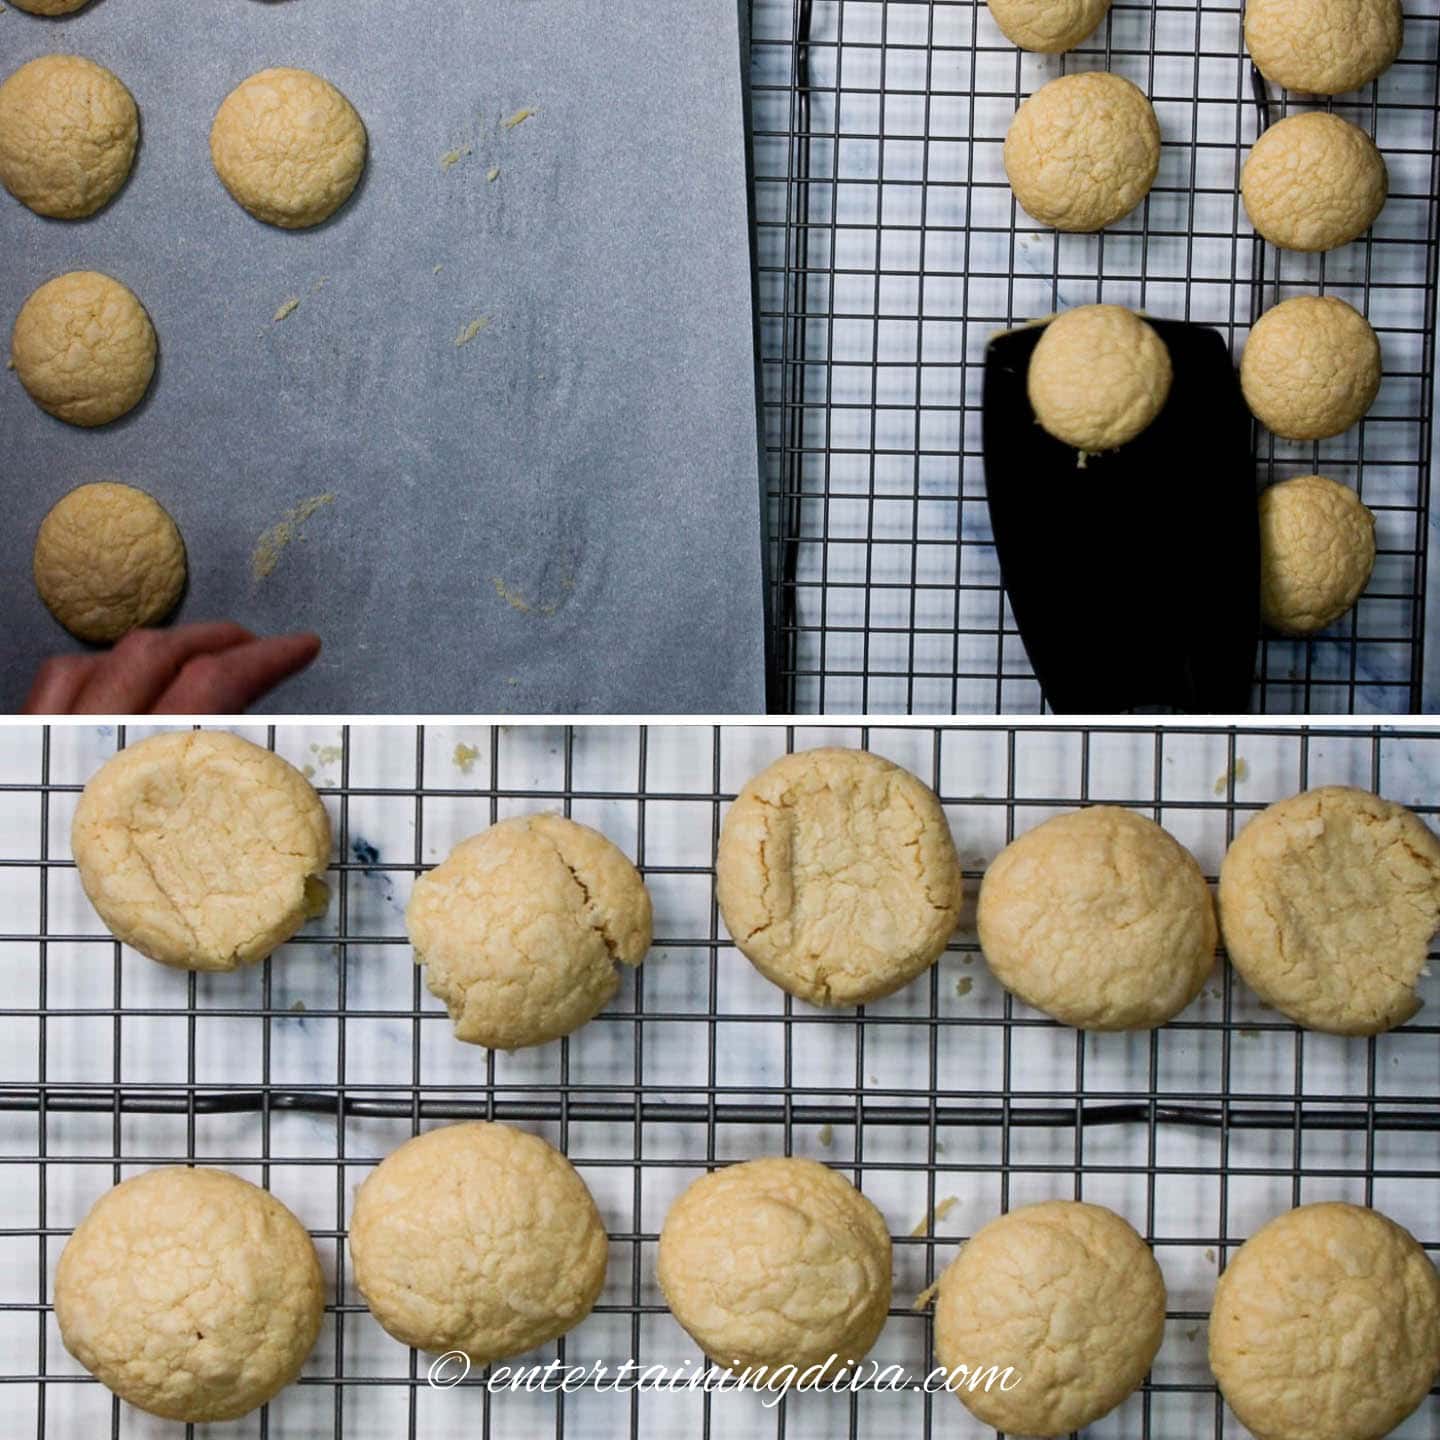 Whipped shortbread cookies being moved to a wire cooling rack after baking